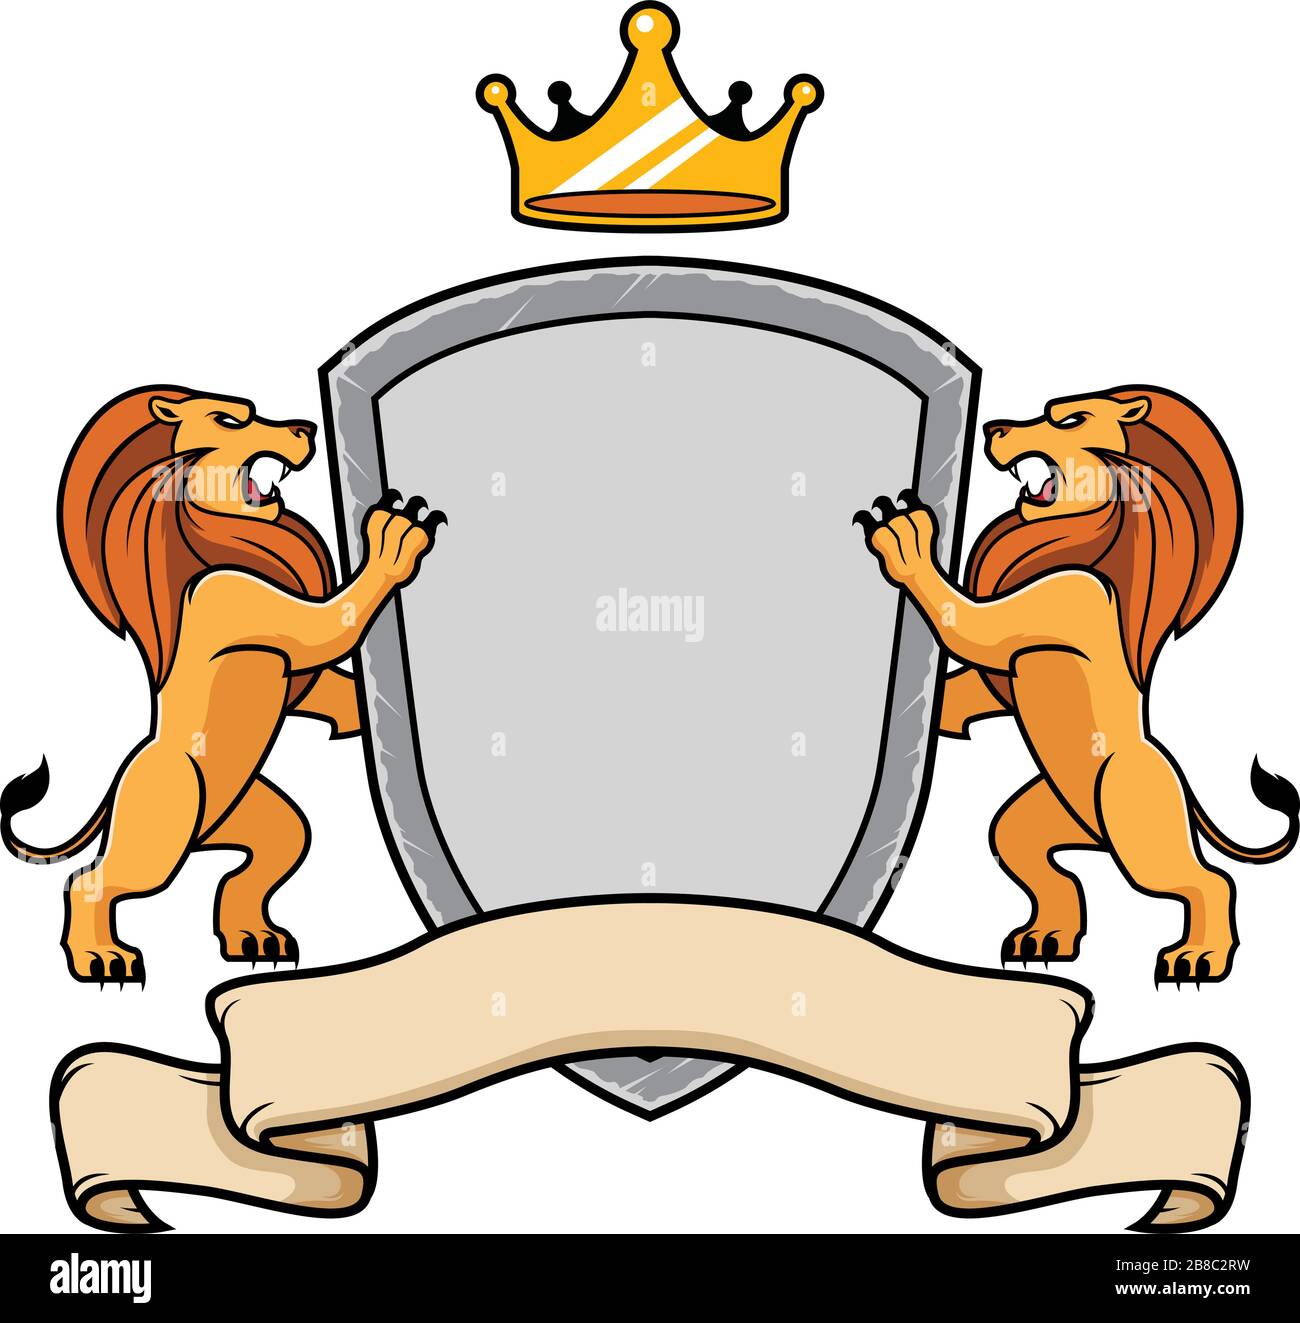 Lions Holding Shield Stock Vector